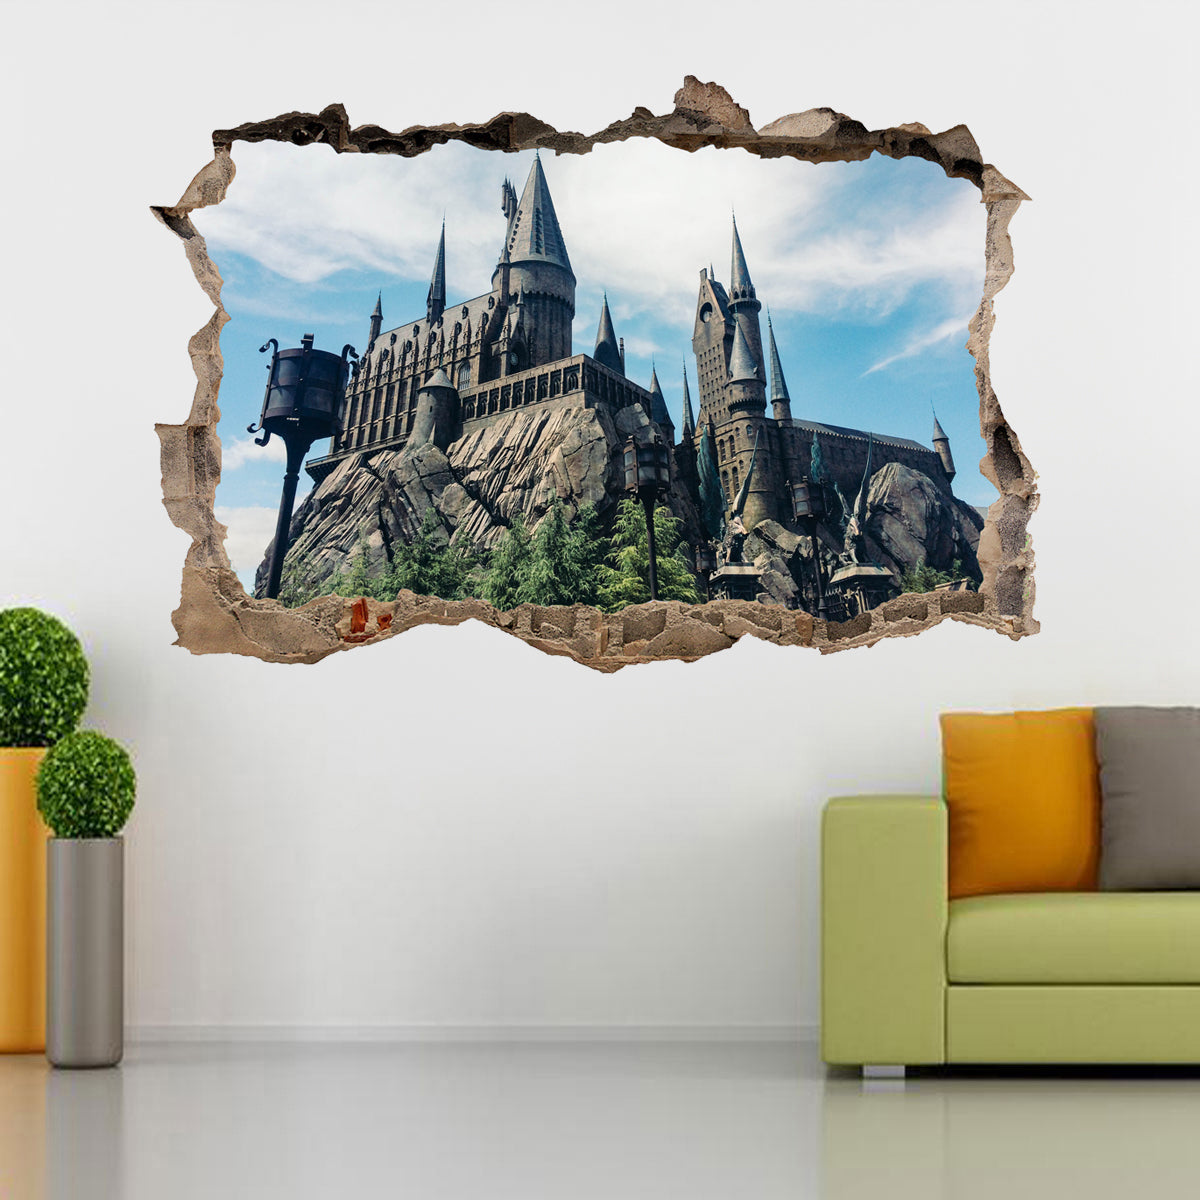 HARRY POTTER HOGWARTS HOUSE PEEL AND STICK WALL DECALS